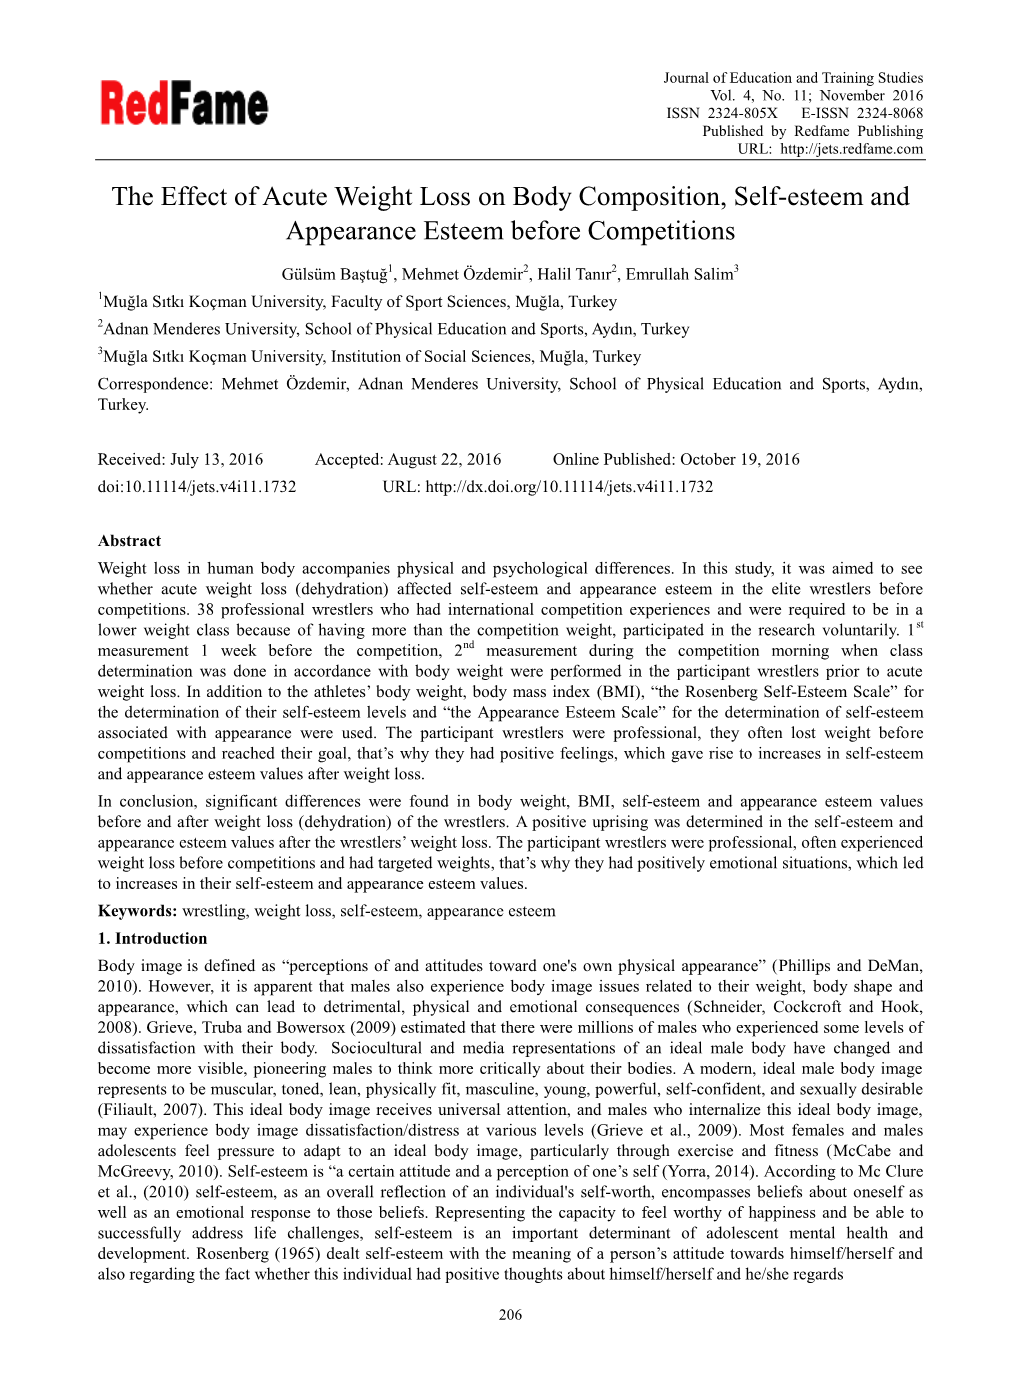 The Effect of Acute Weight Loss on Body Composition, Self-Esteem and Appearance Esteem Before Competitions